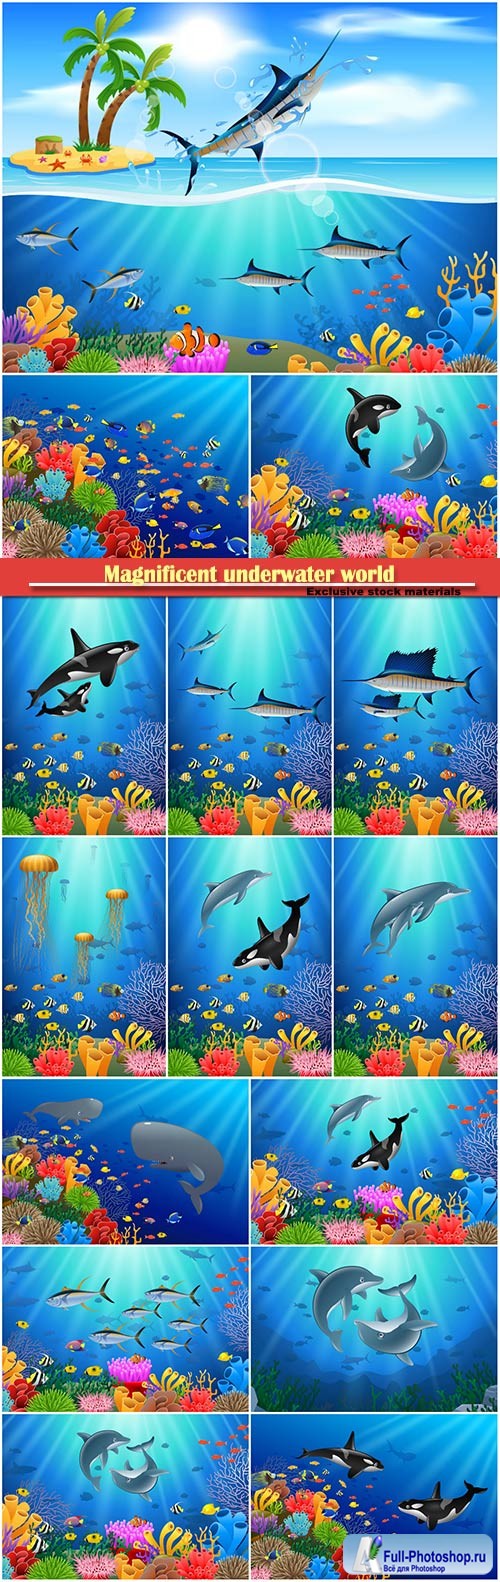 Magnificent underwater world and its inhabitants, vector dolphins, whales, fishes